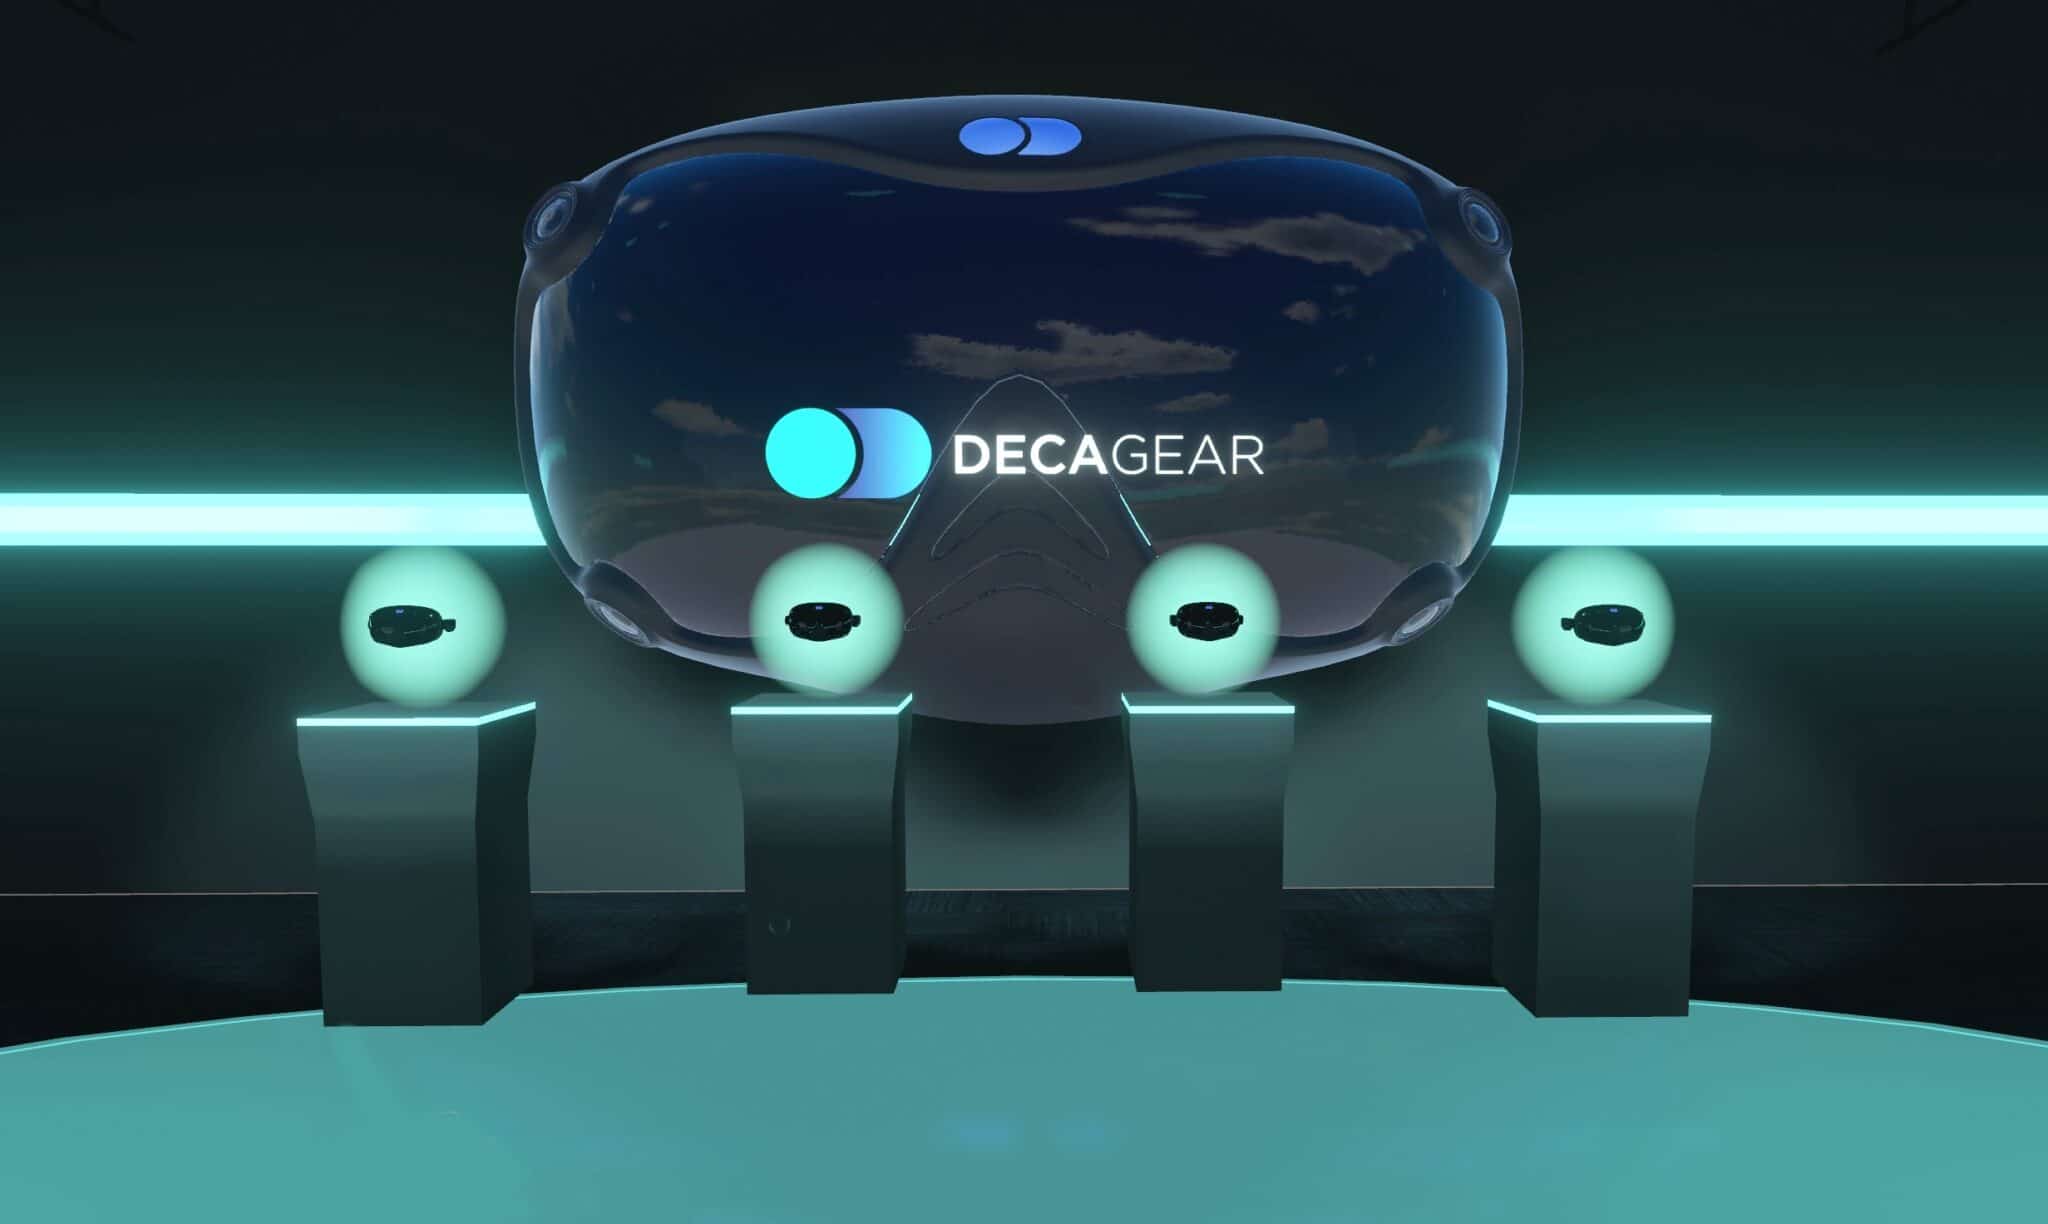 DecaGear VR Headset to be showcased at VRChat this weekend